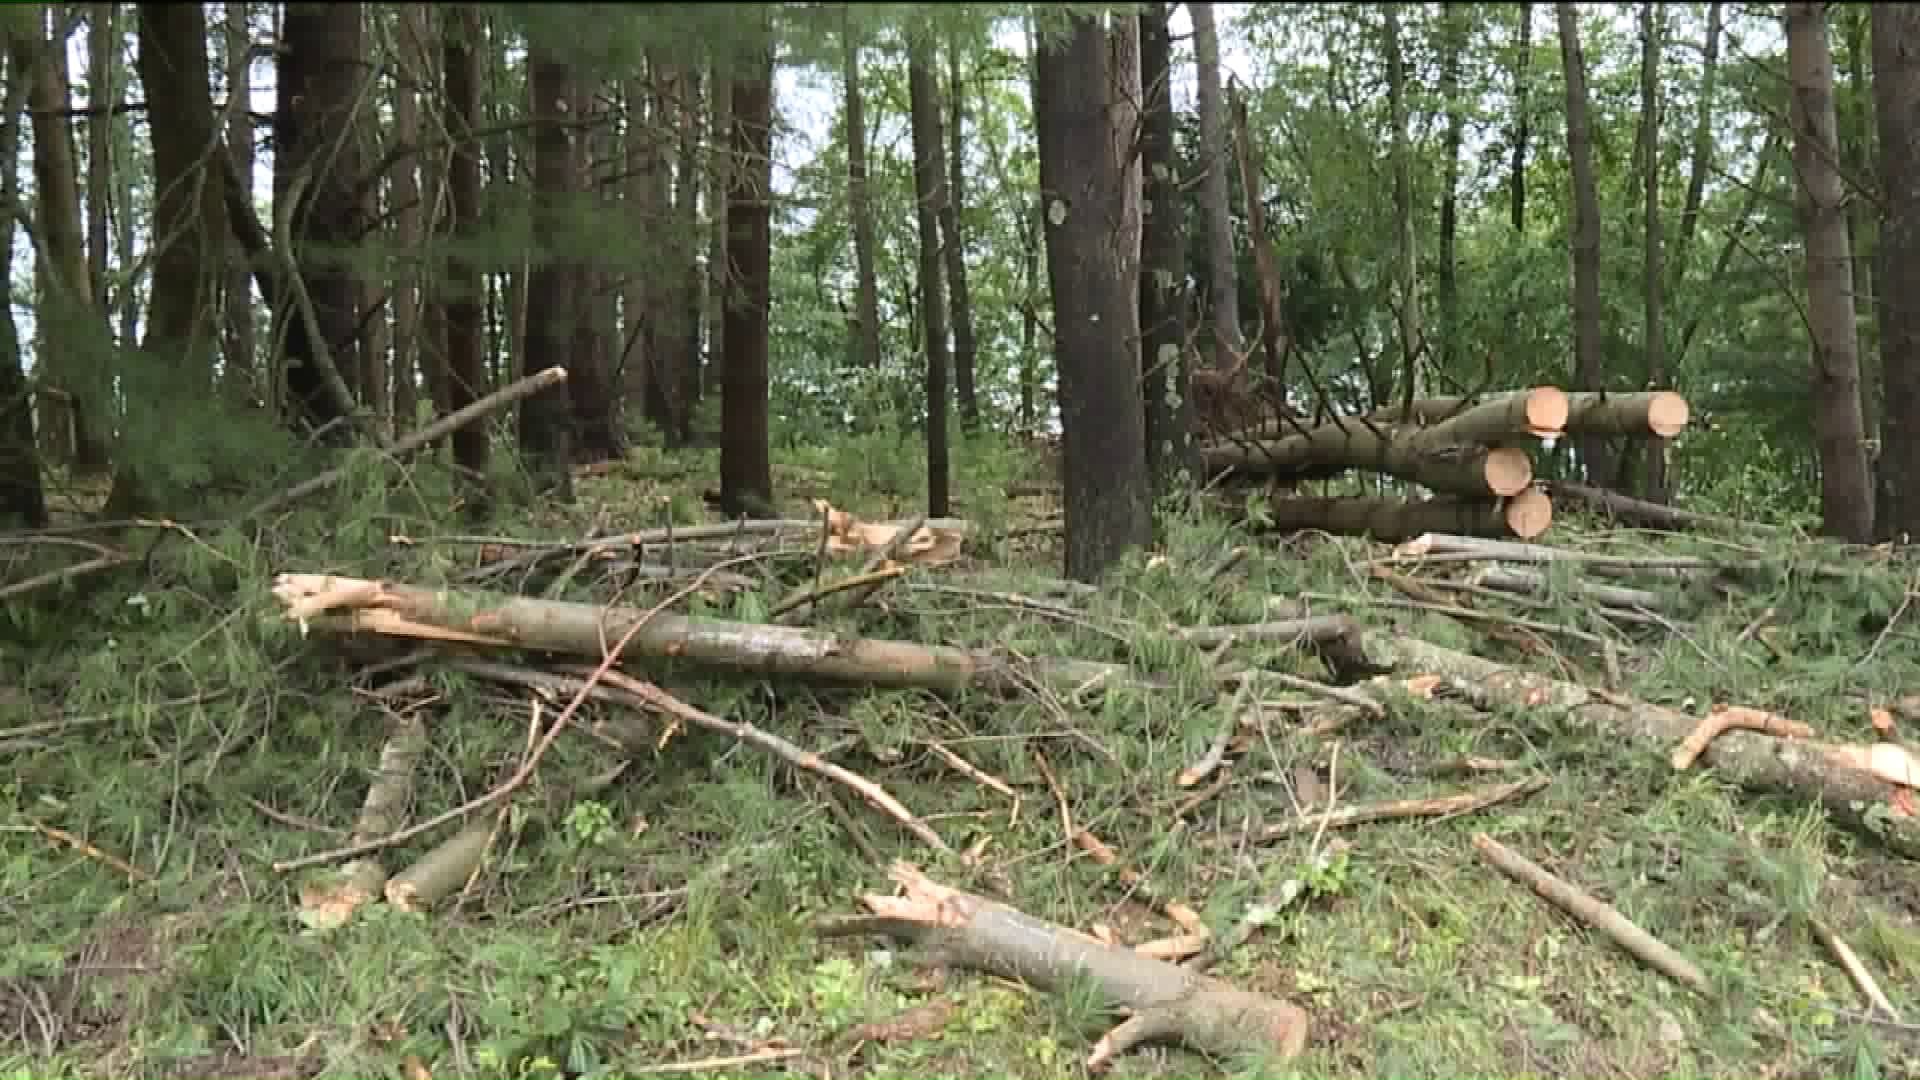 Cleanup Begins in Wyoming County After Severe Storms